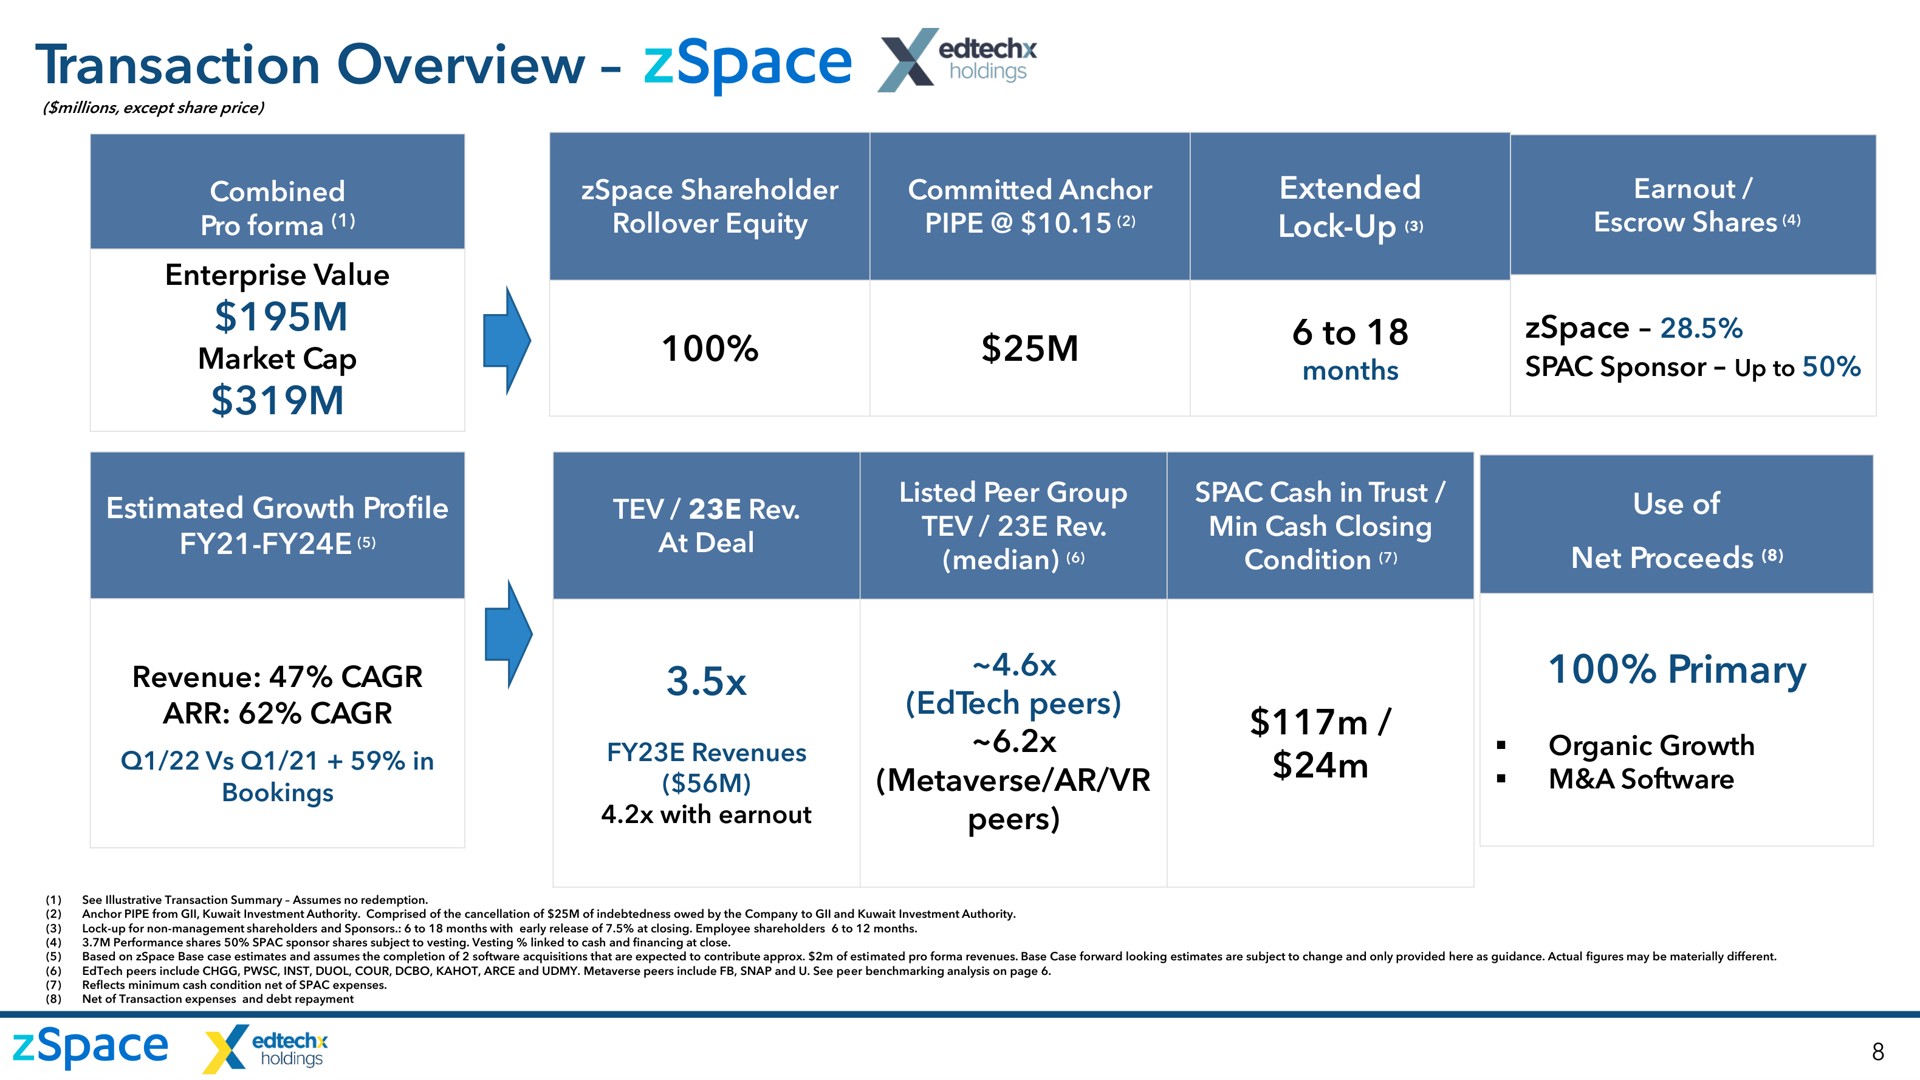 transaction overview sponsor up to peers | zSpace